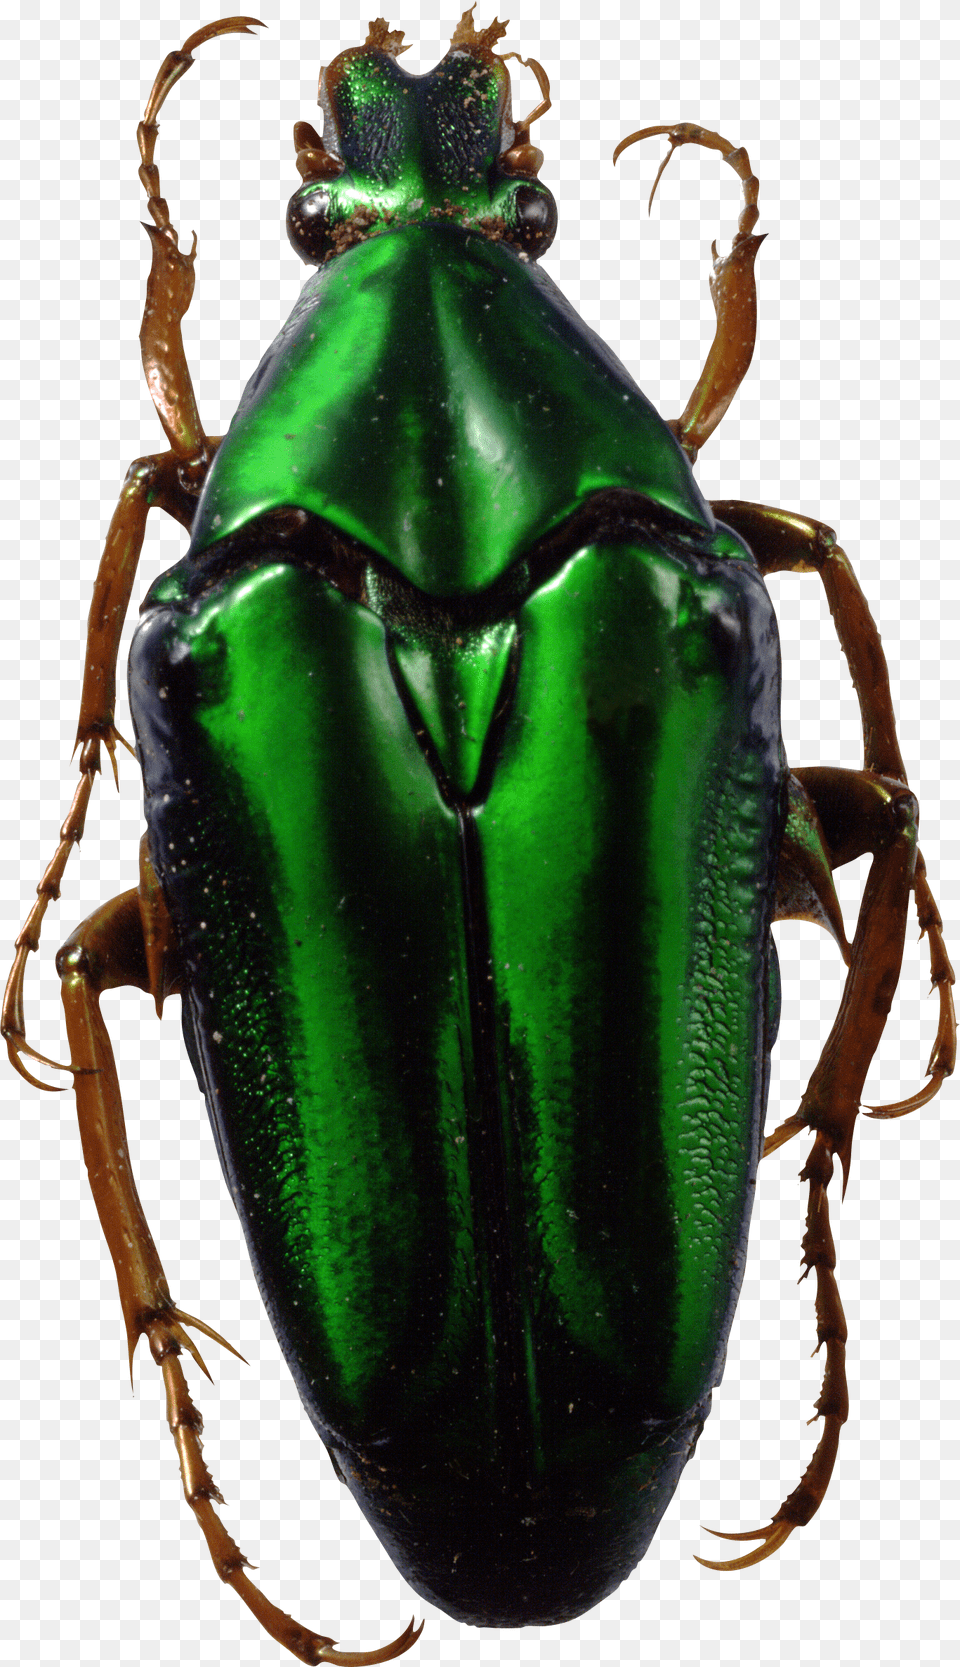 Bug, Animal, Insect, Invertebrate, Dung Beetle Png Image